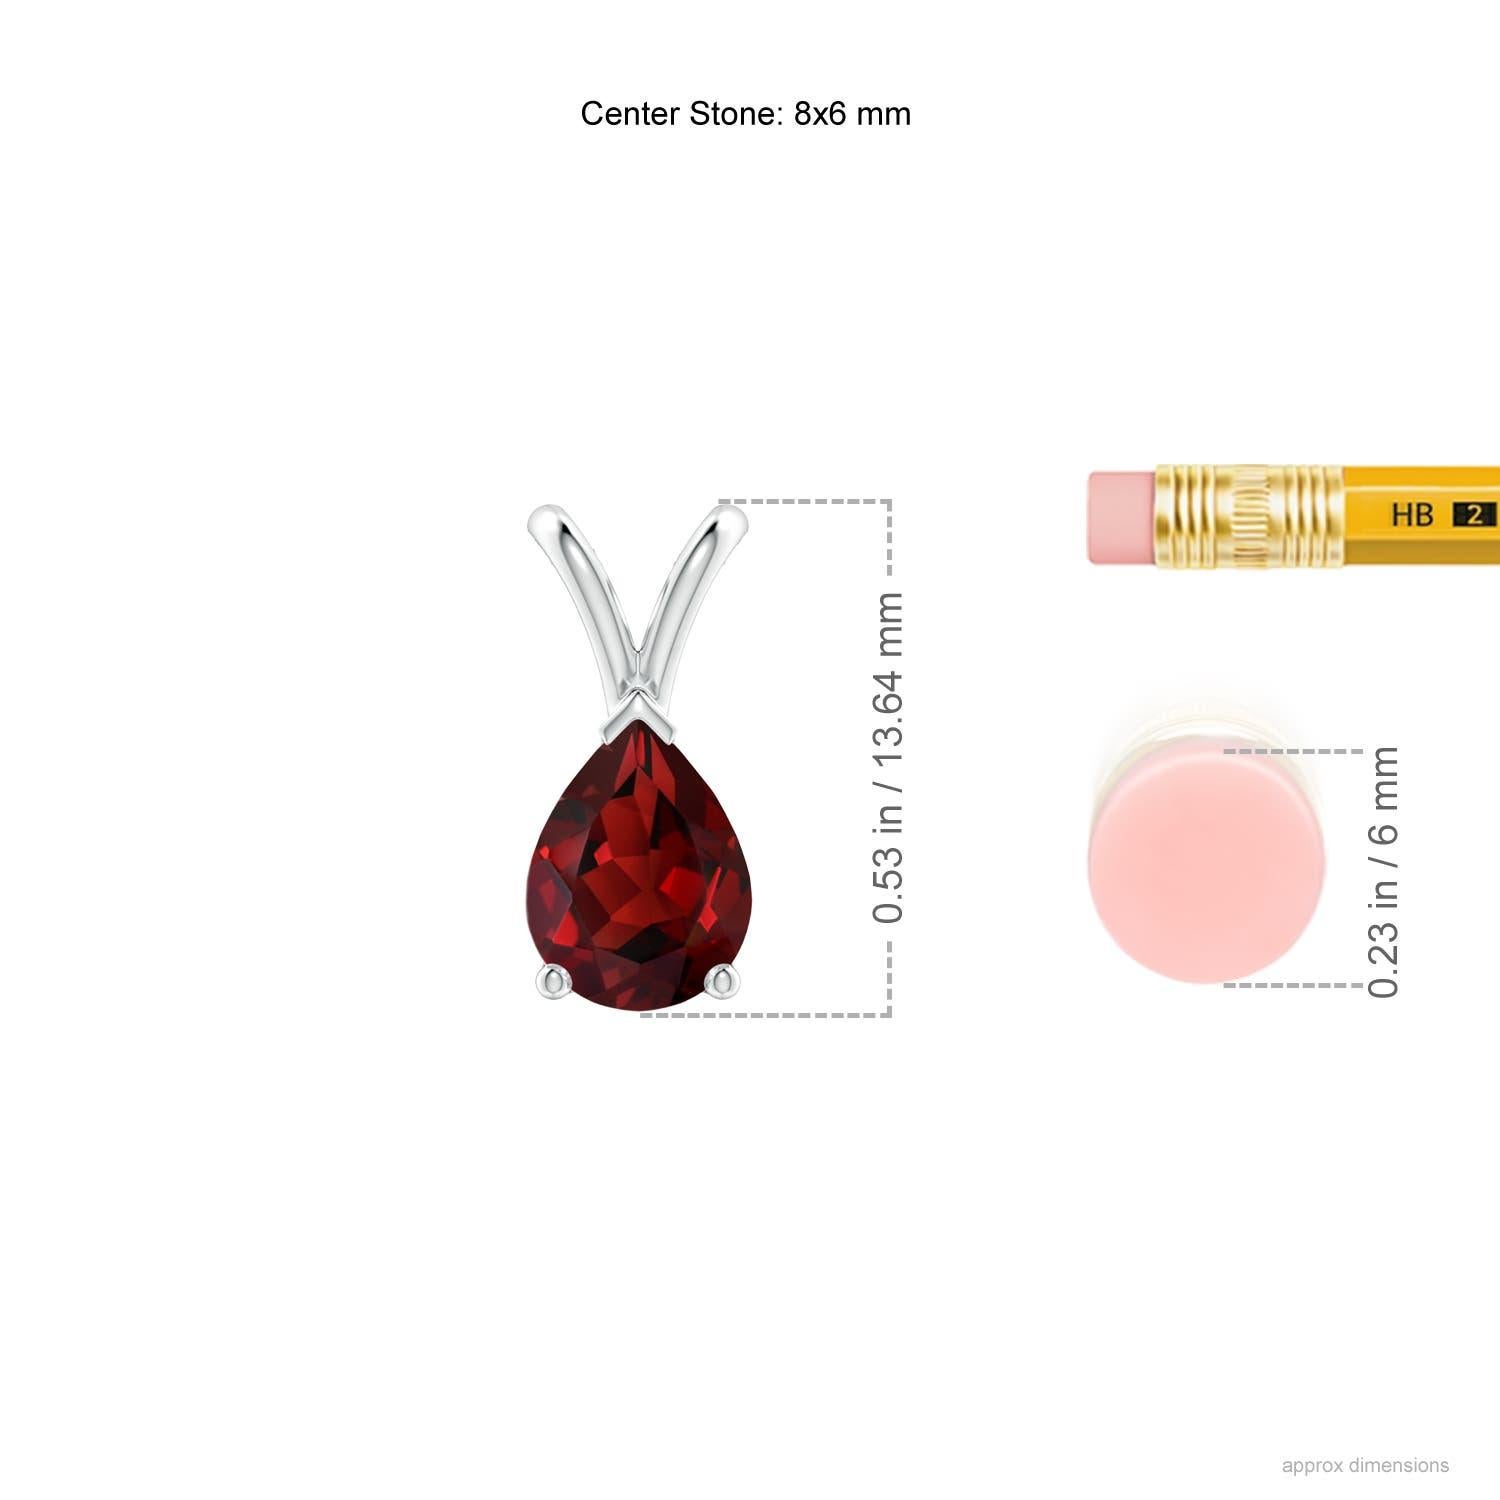 This platinum classic solitaire garnet pendant looks elegant in its minimalistic design. Linked to a shiny v-bale, the magnificent pear-shaped garnet captivates with its intense red hue. The three-prong setting of the gem showcases its exceptional